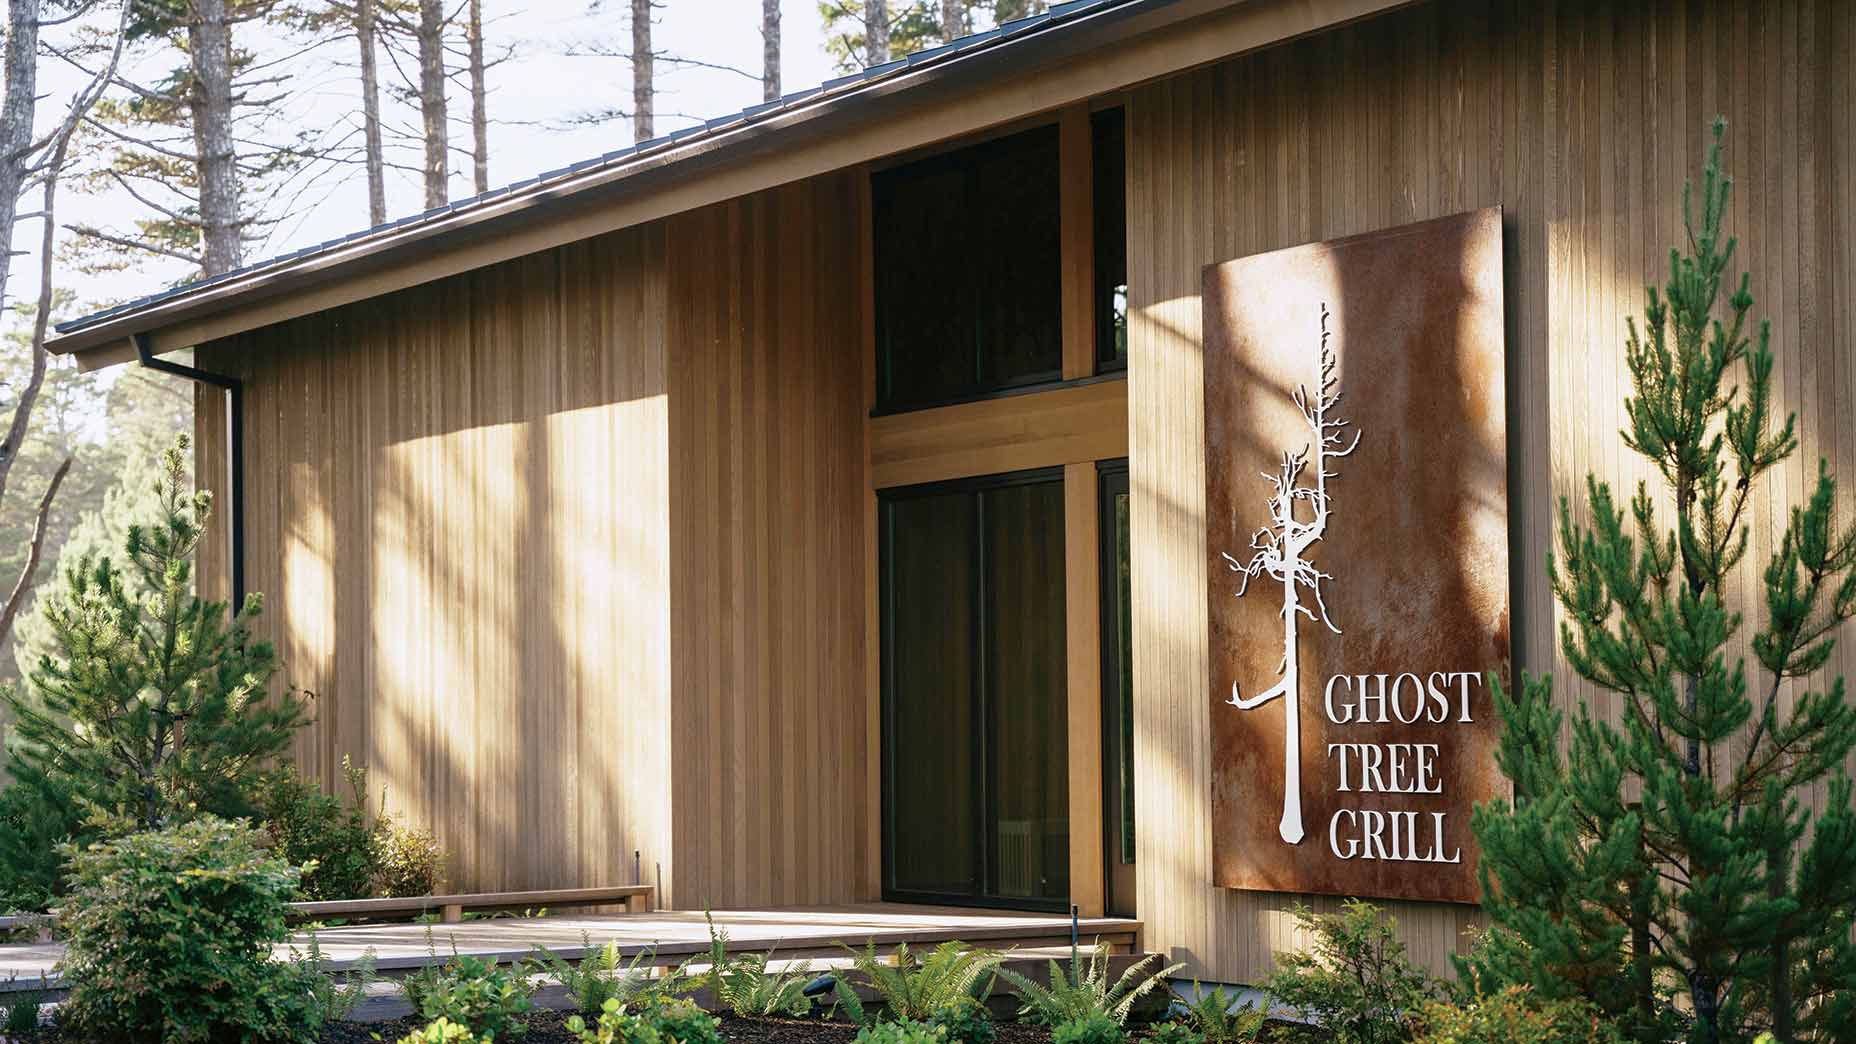 the entrance to the ghost tree grill